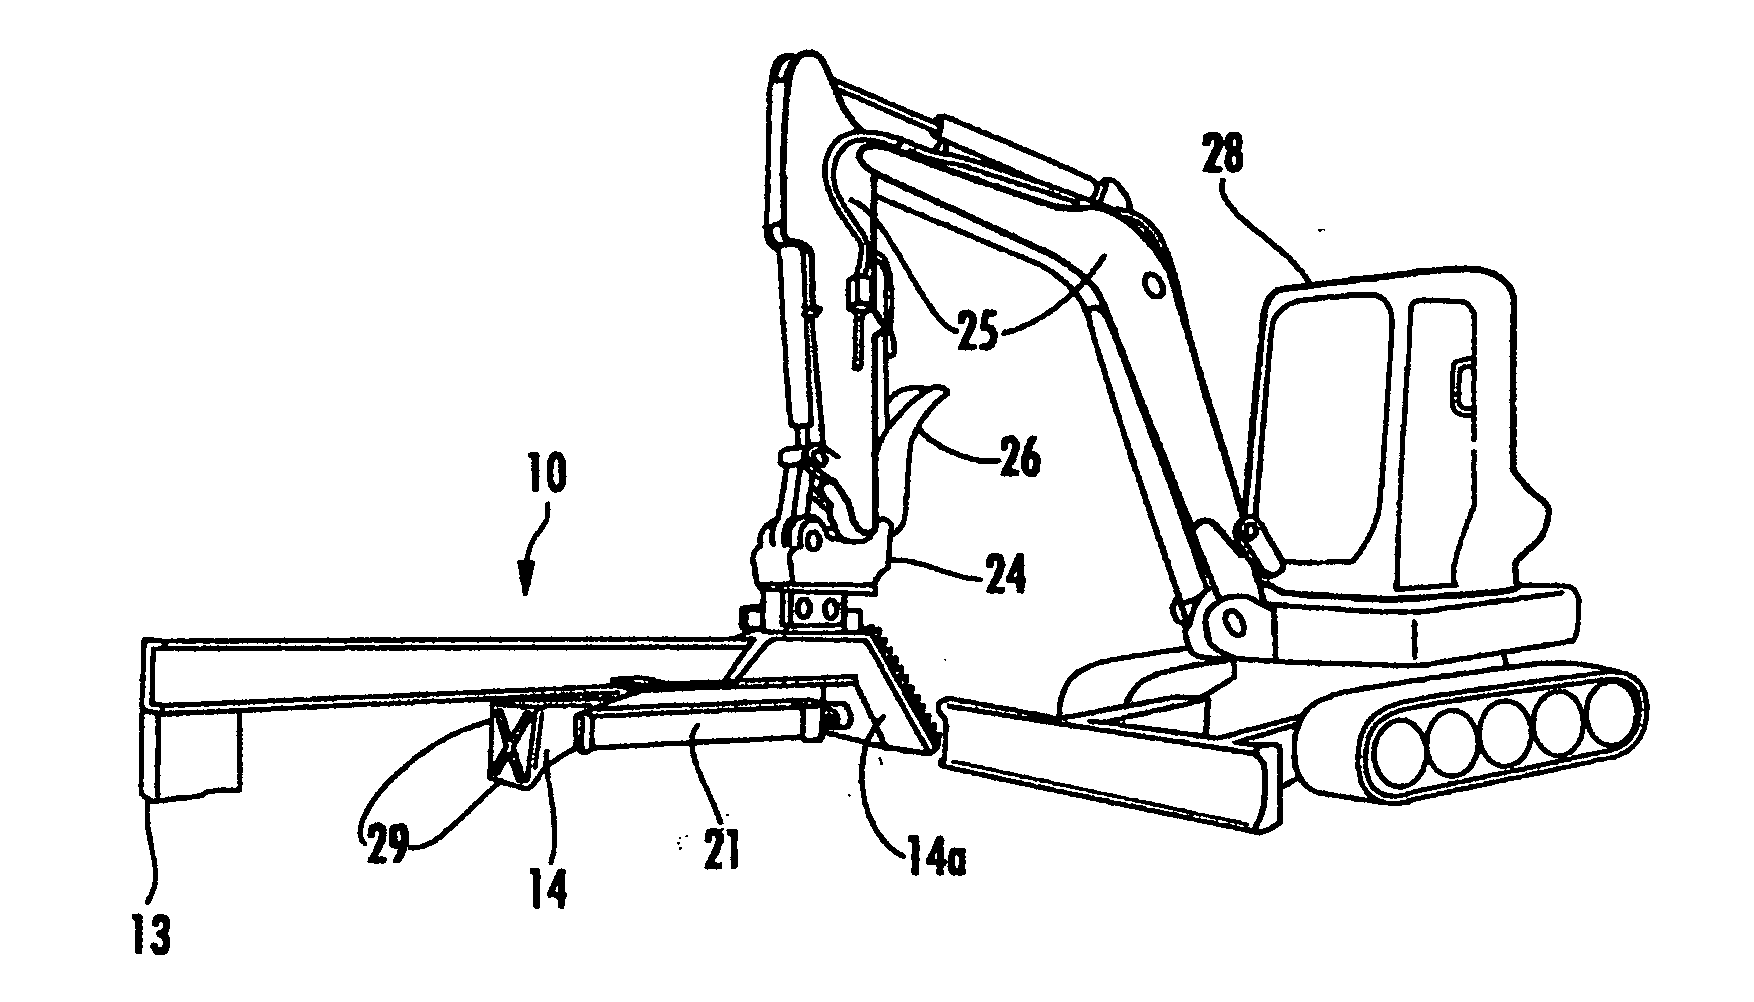 Apparatus for positioning and splitting wood